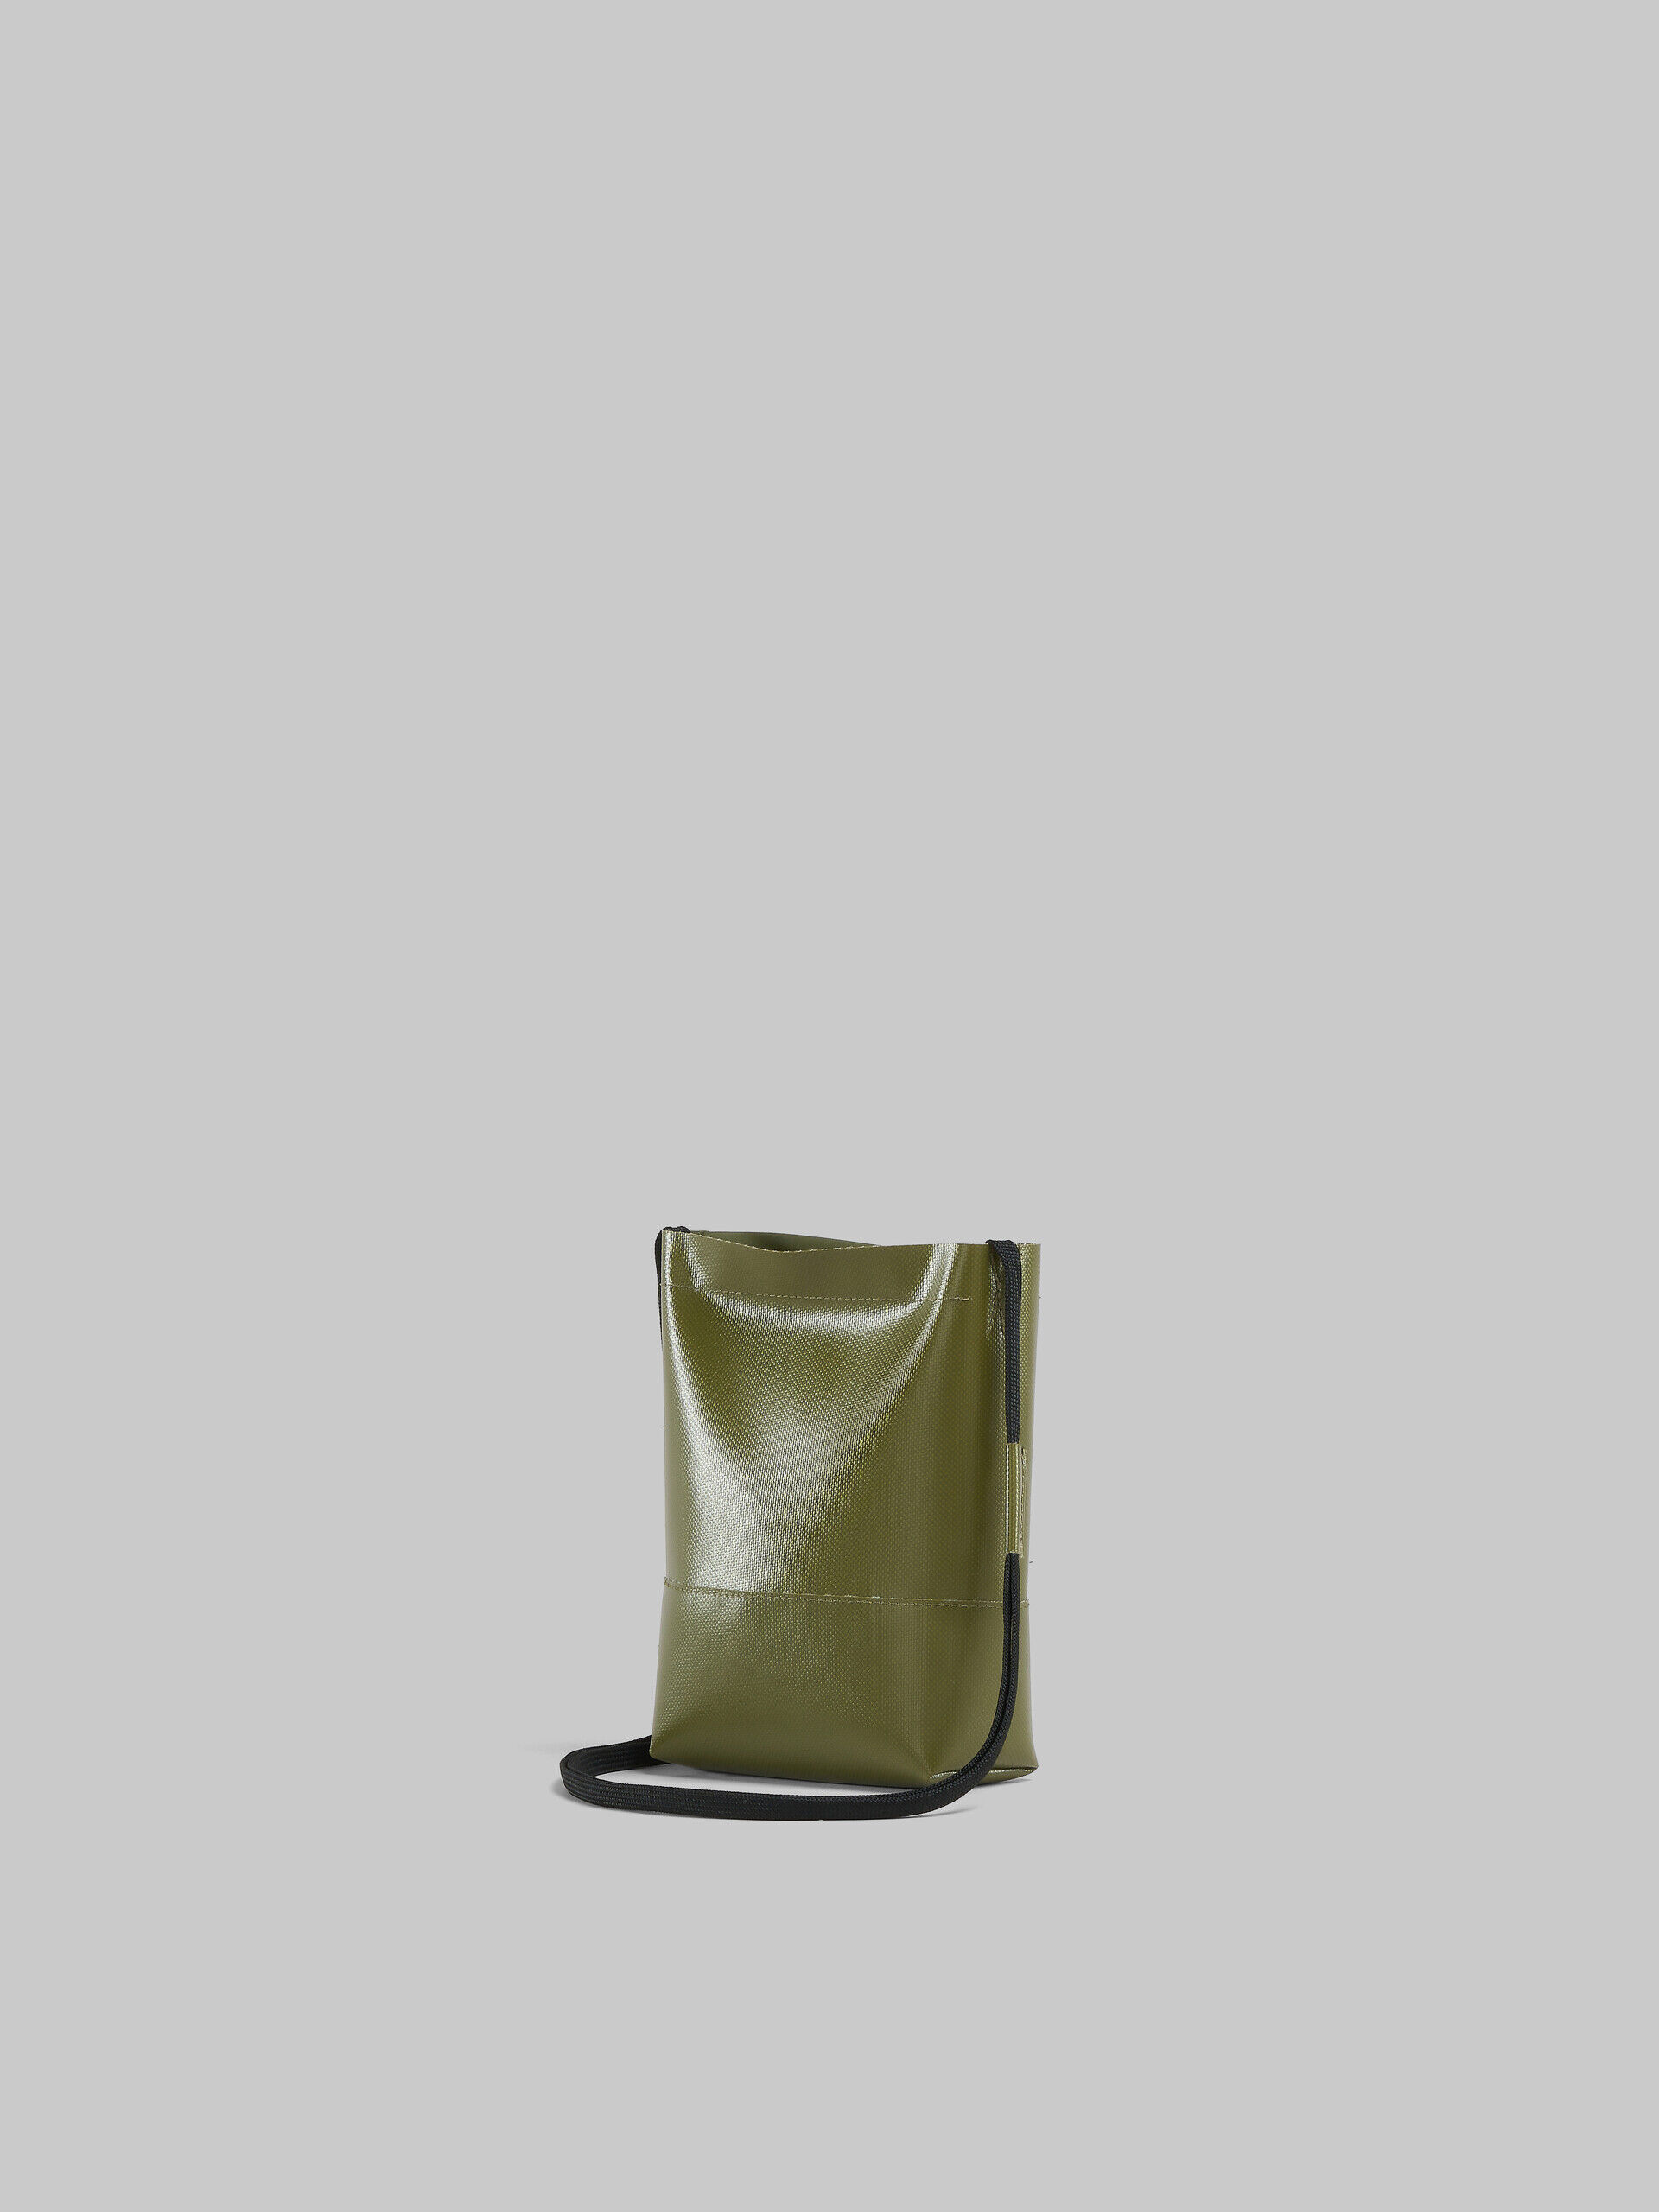 Green crossbody bag with shoelace strap | Marni